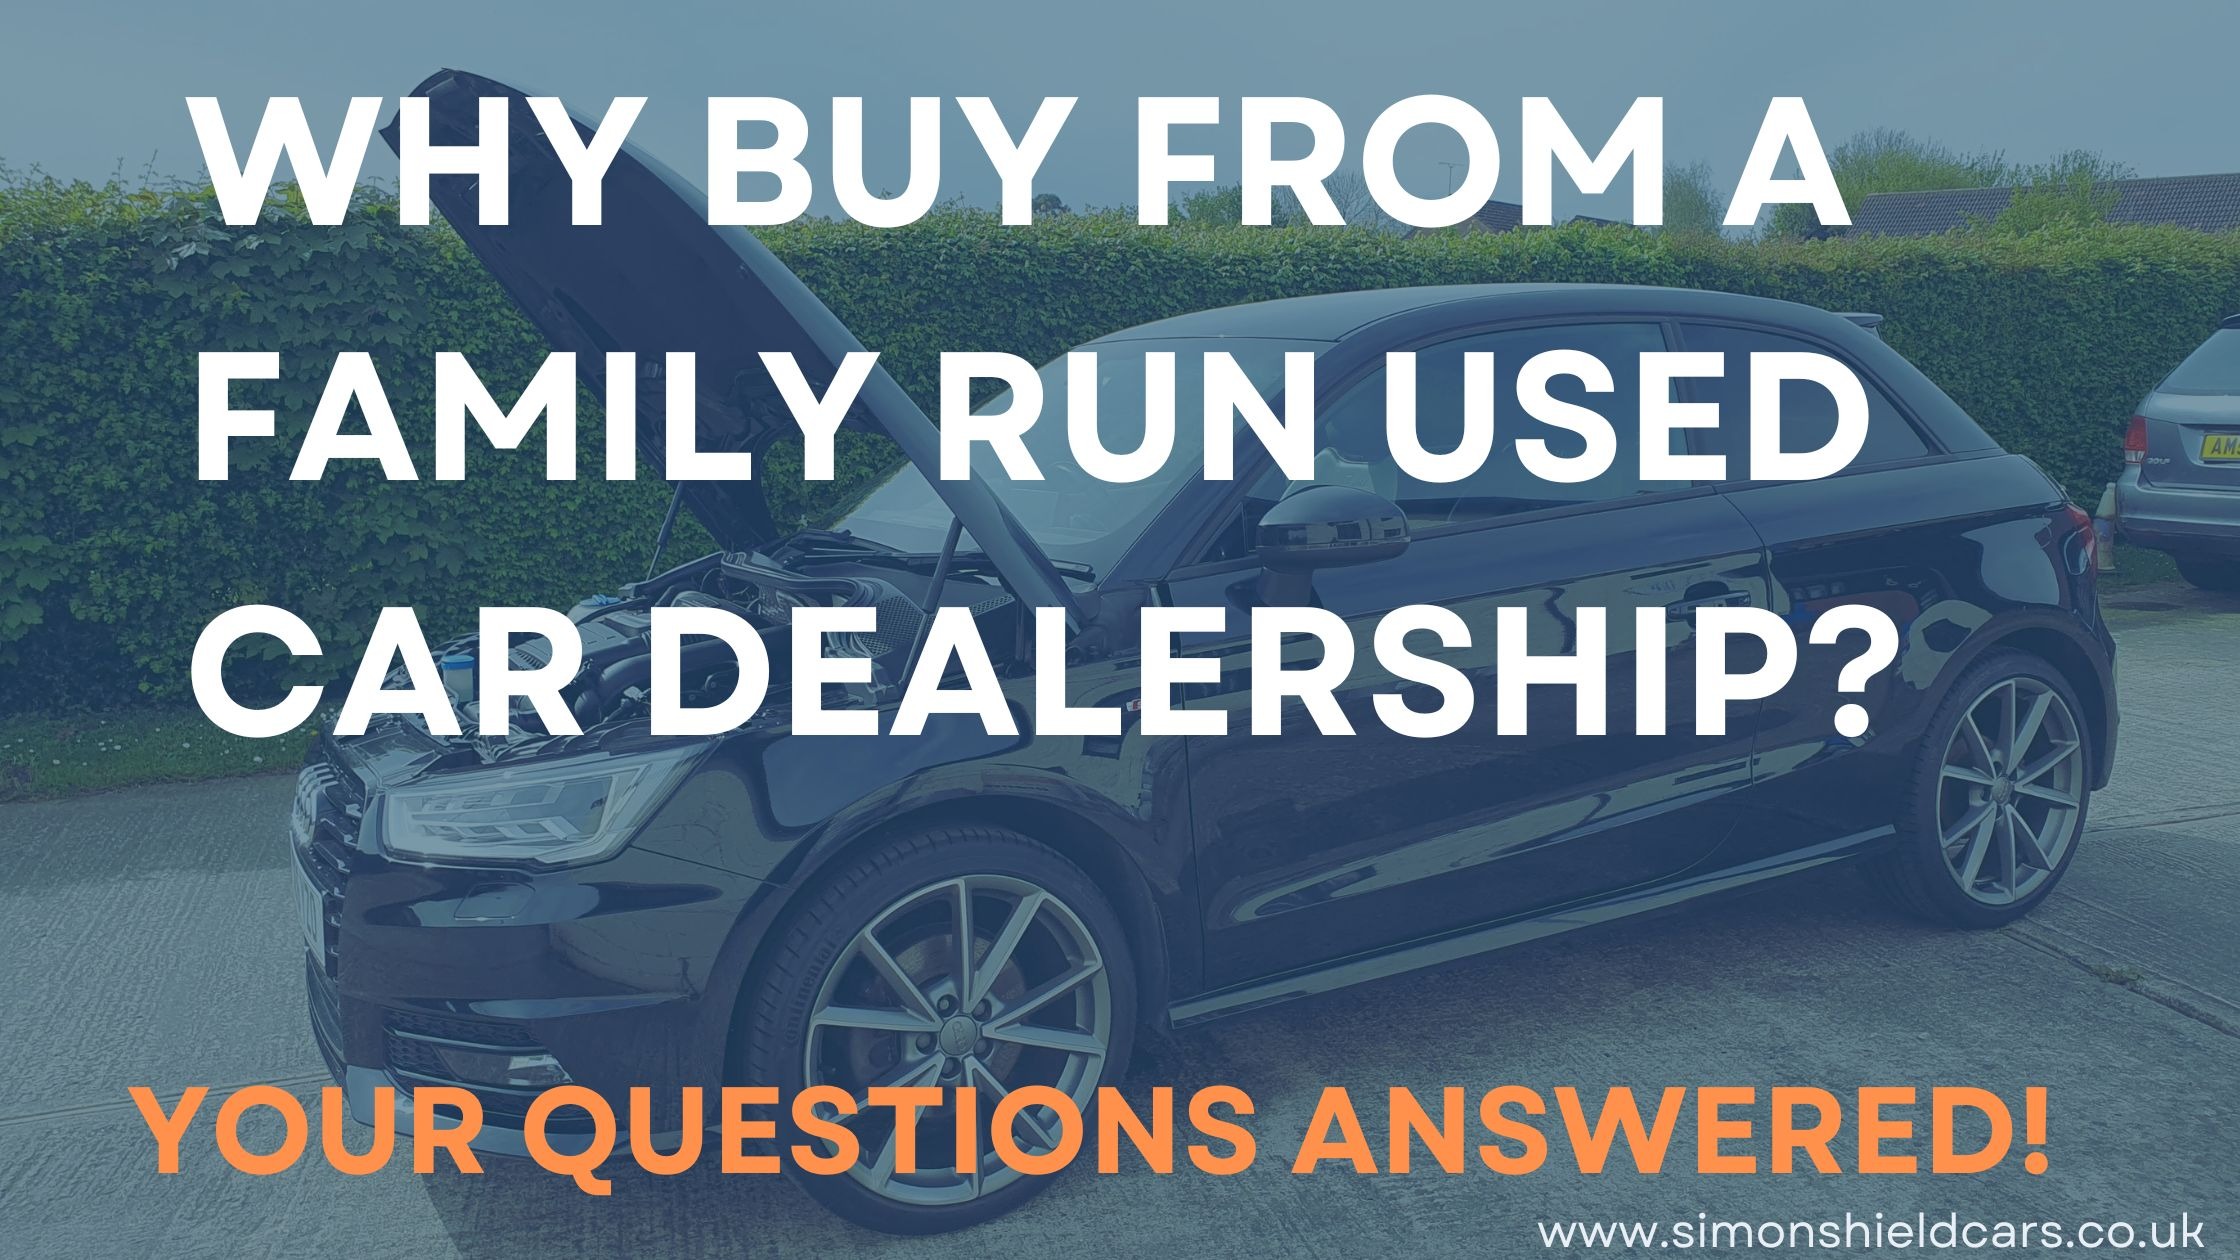 Why buy from a family-run used car dealership? You're question answered!